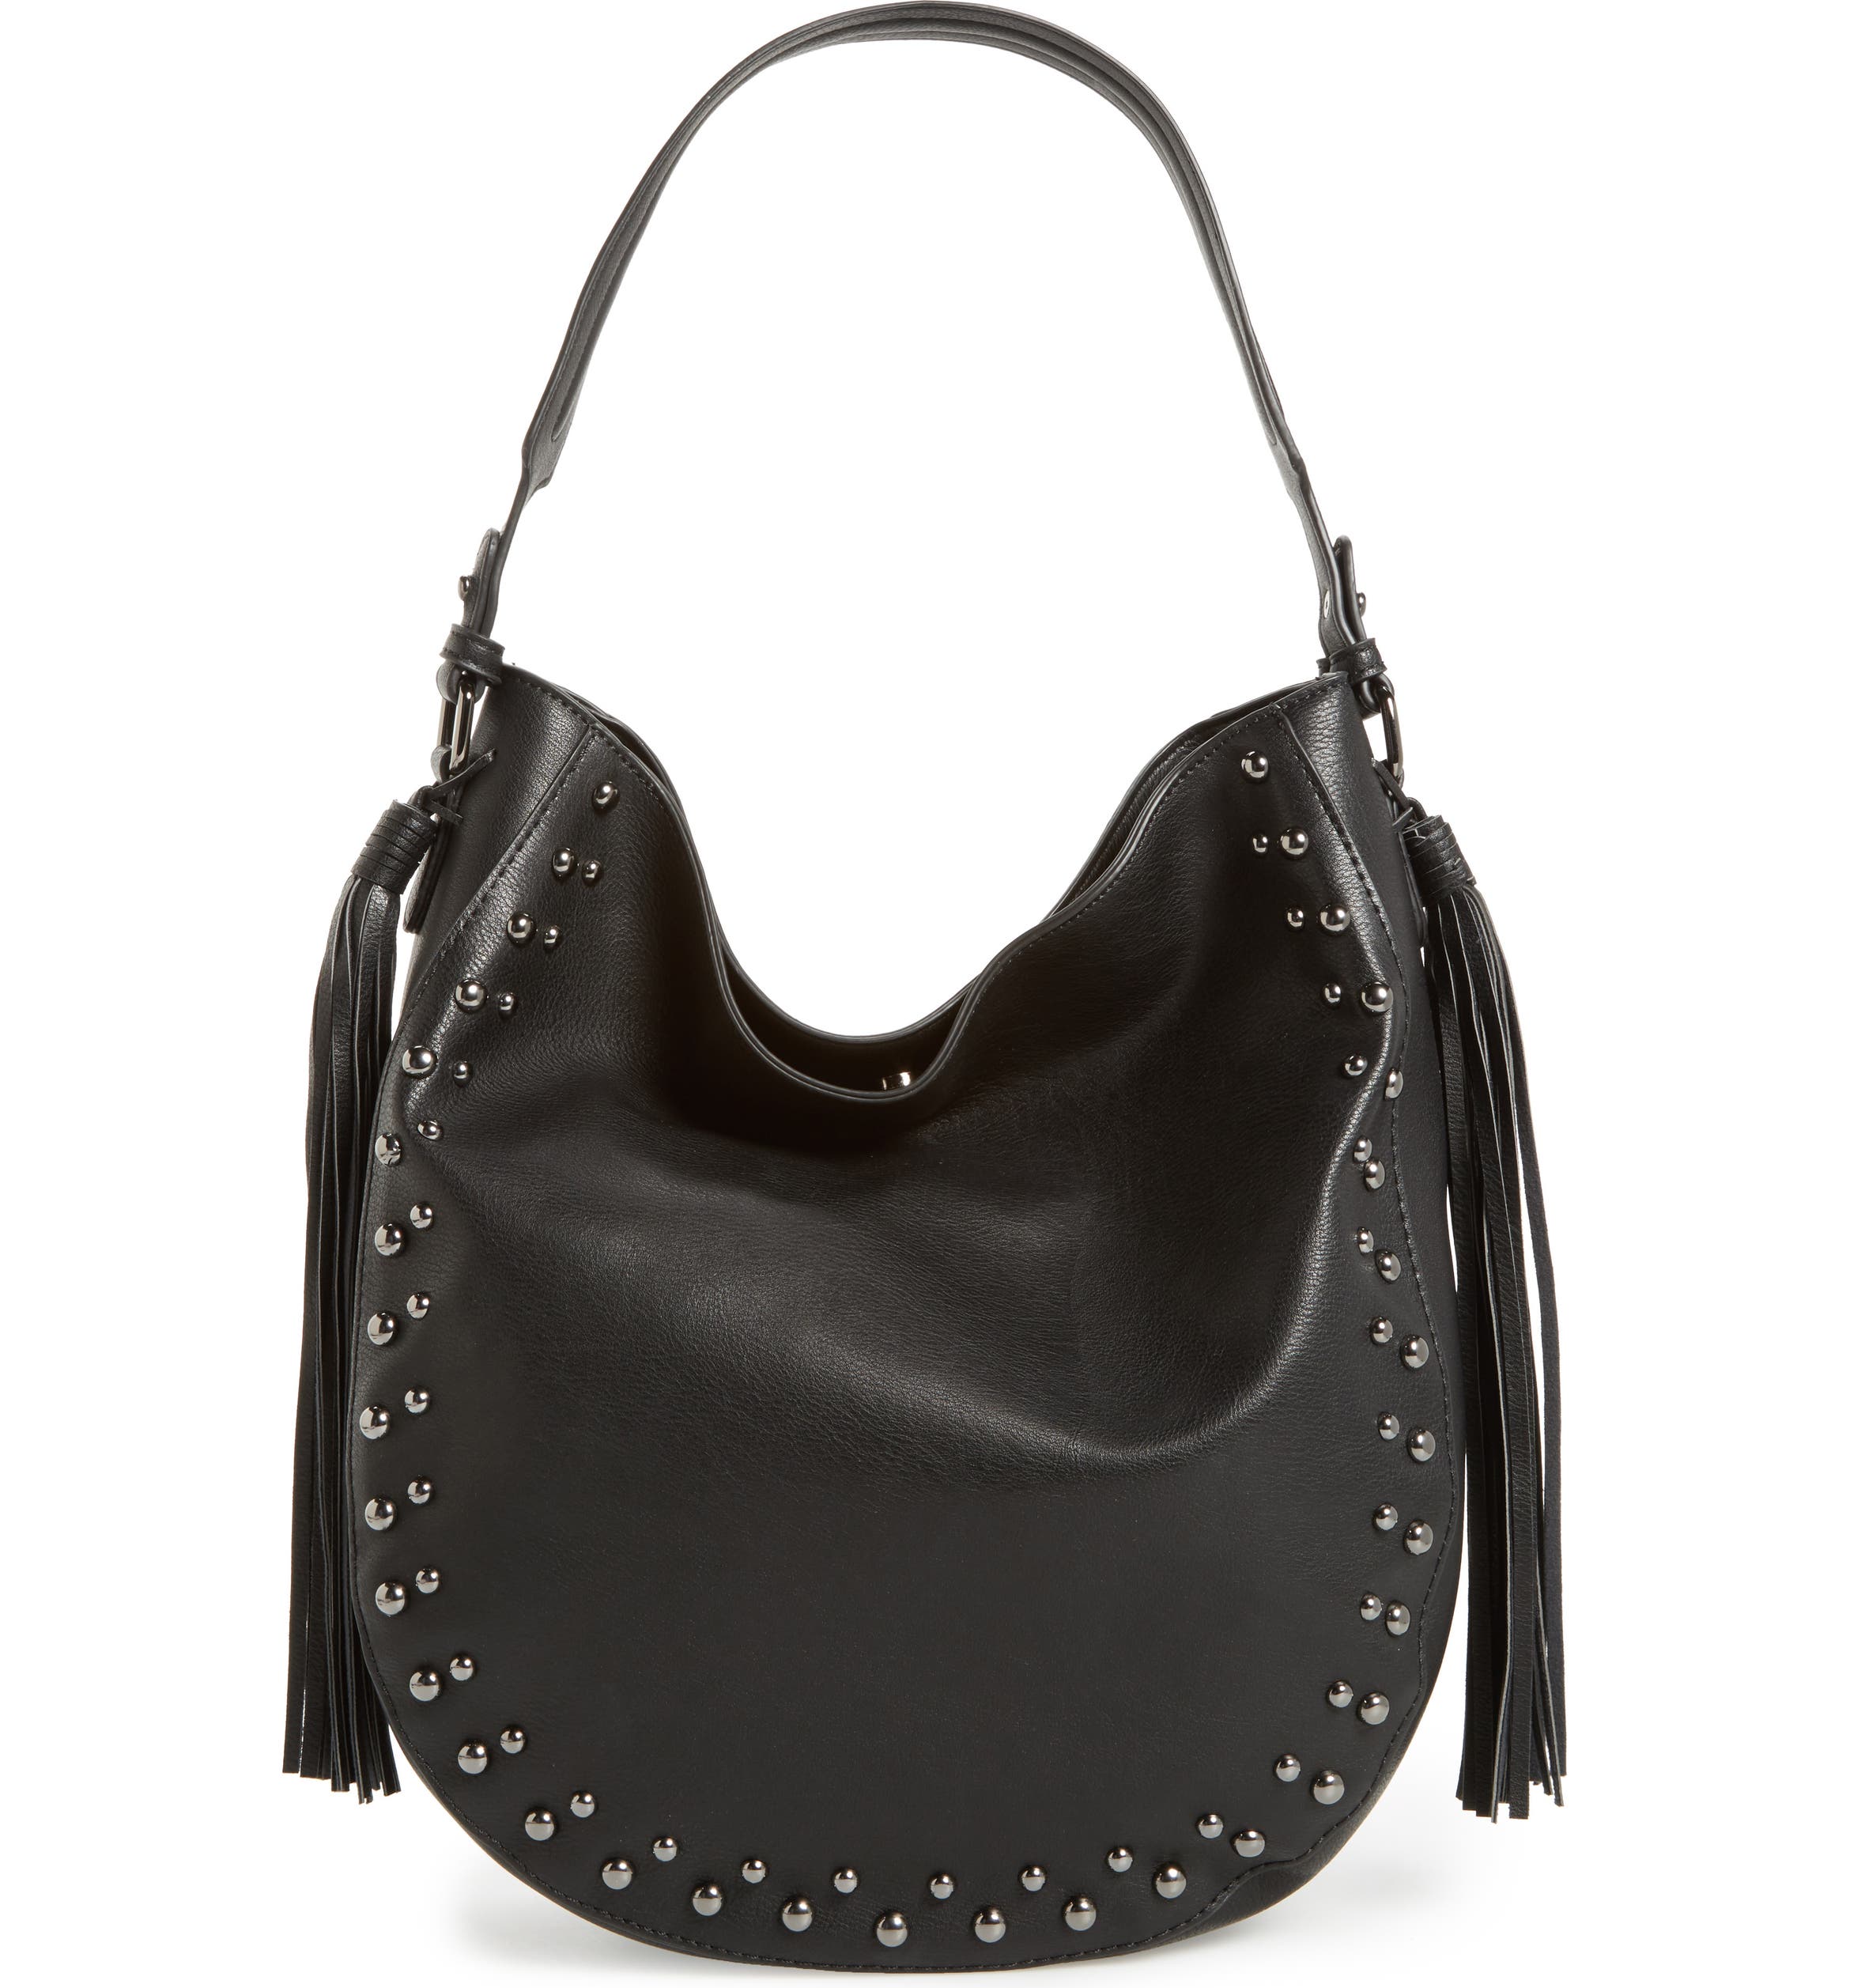 Phase 3 Studded Faux Leather Hobo Bag | Nordstrom